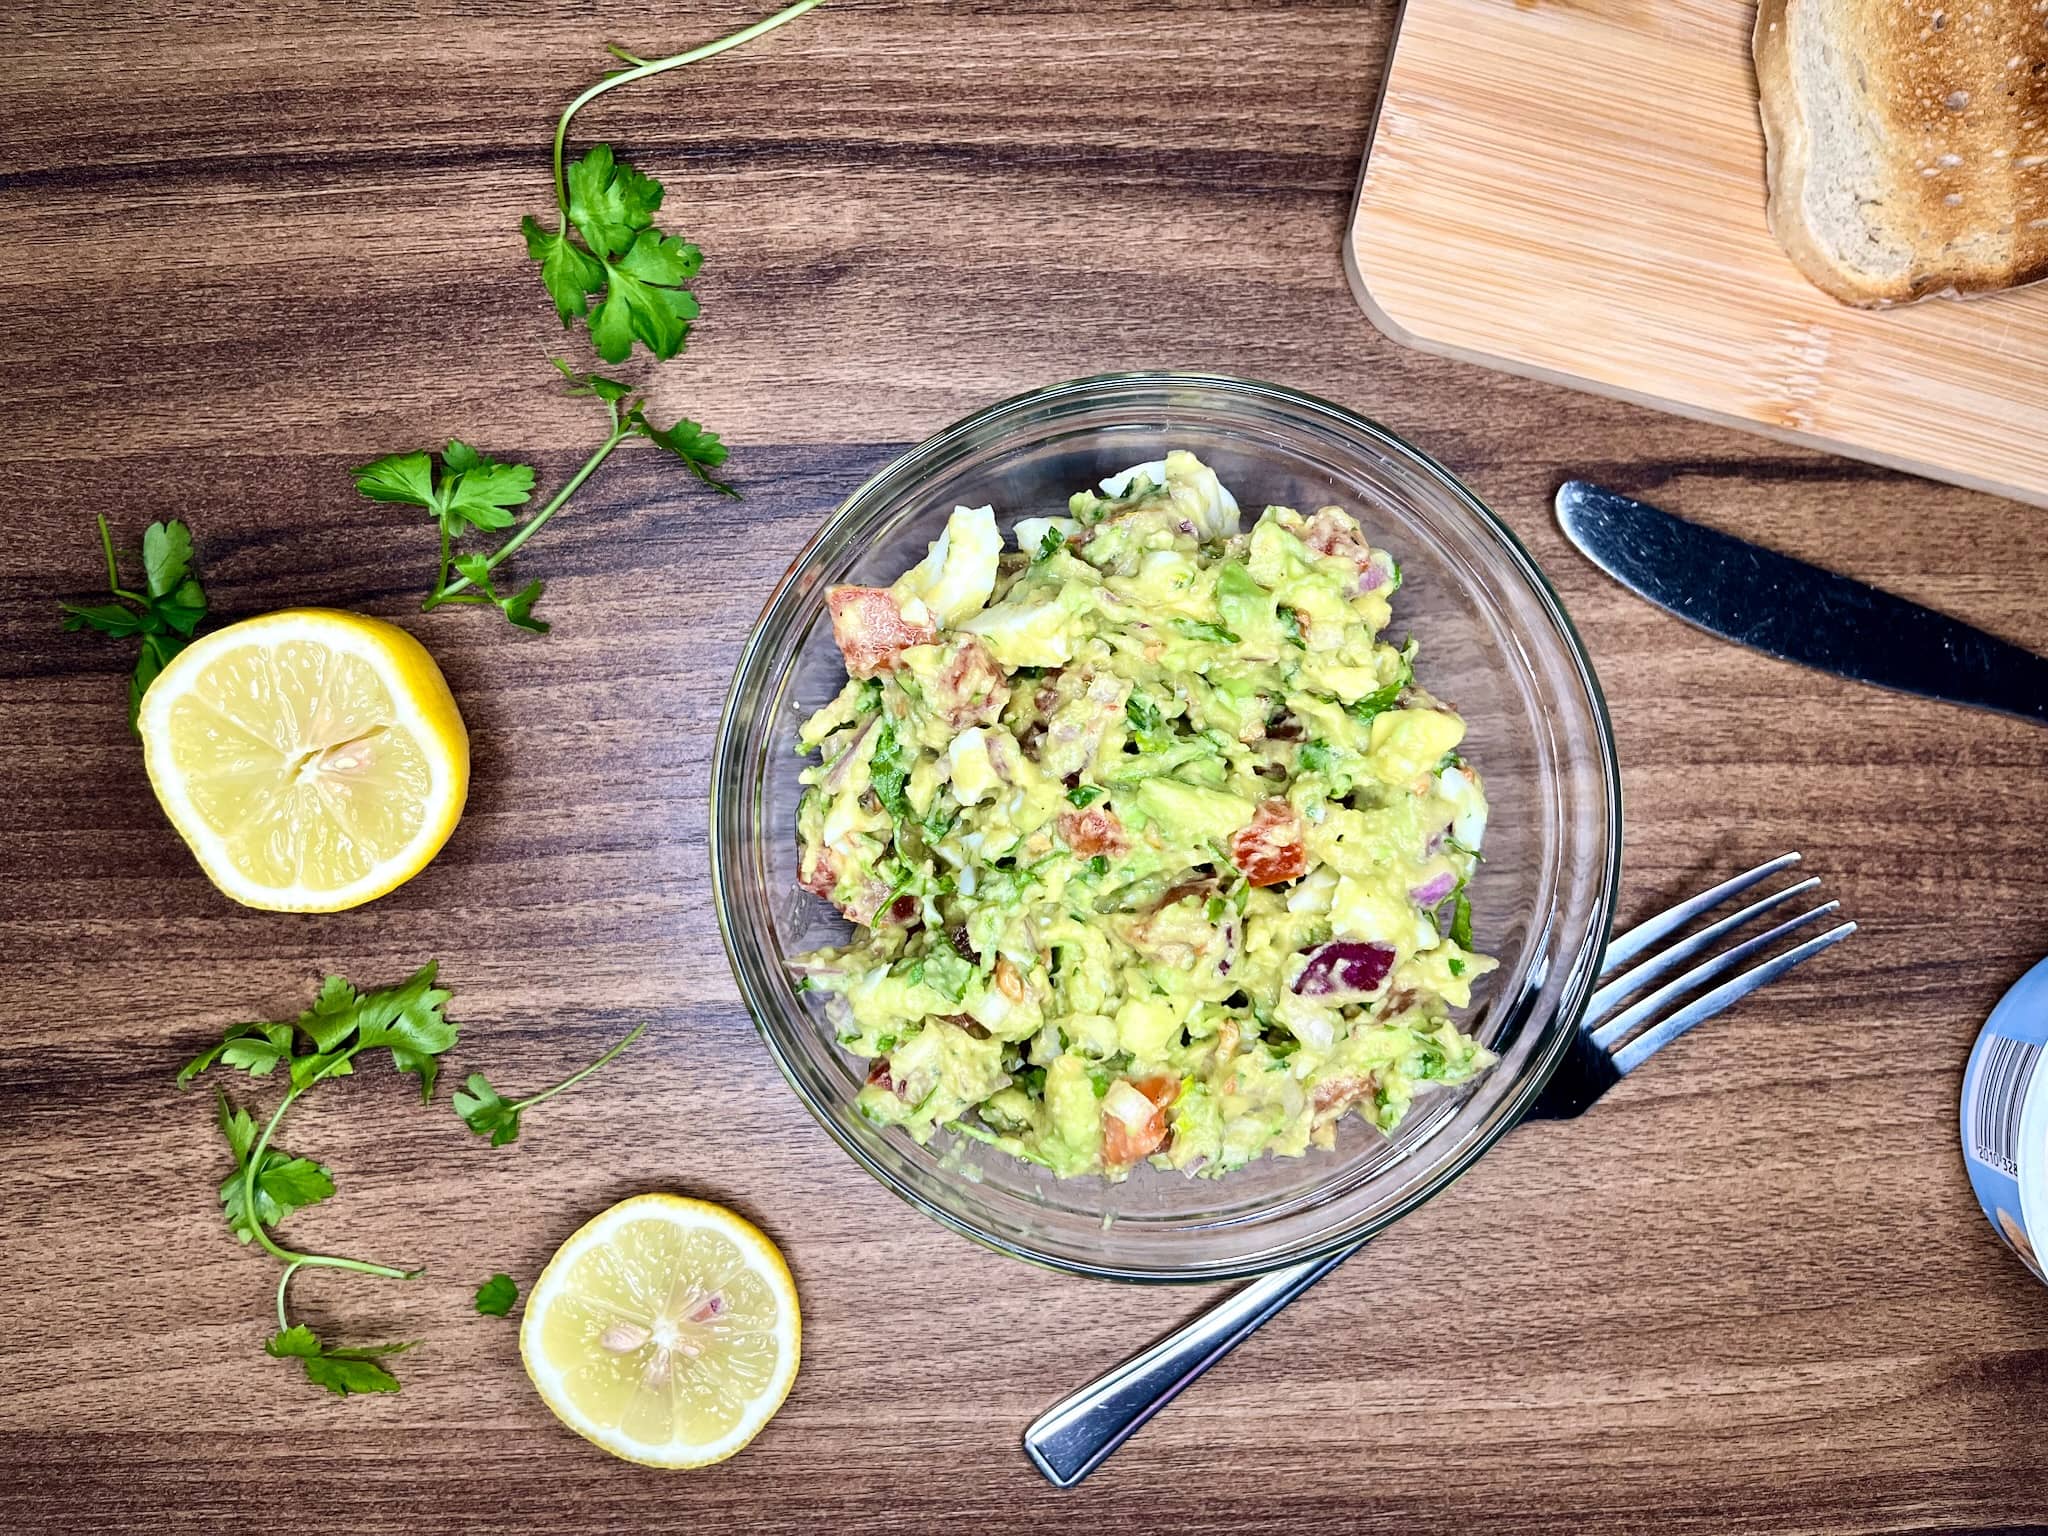 Ready Avocado and Egg Sandwich Salad in a bowl